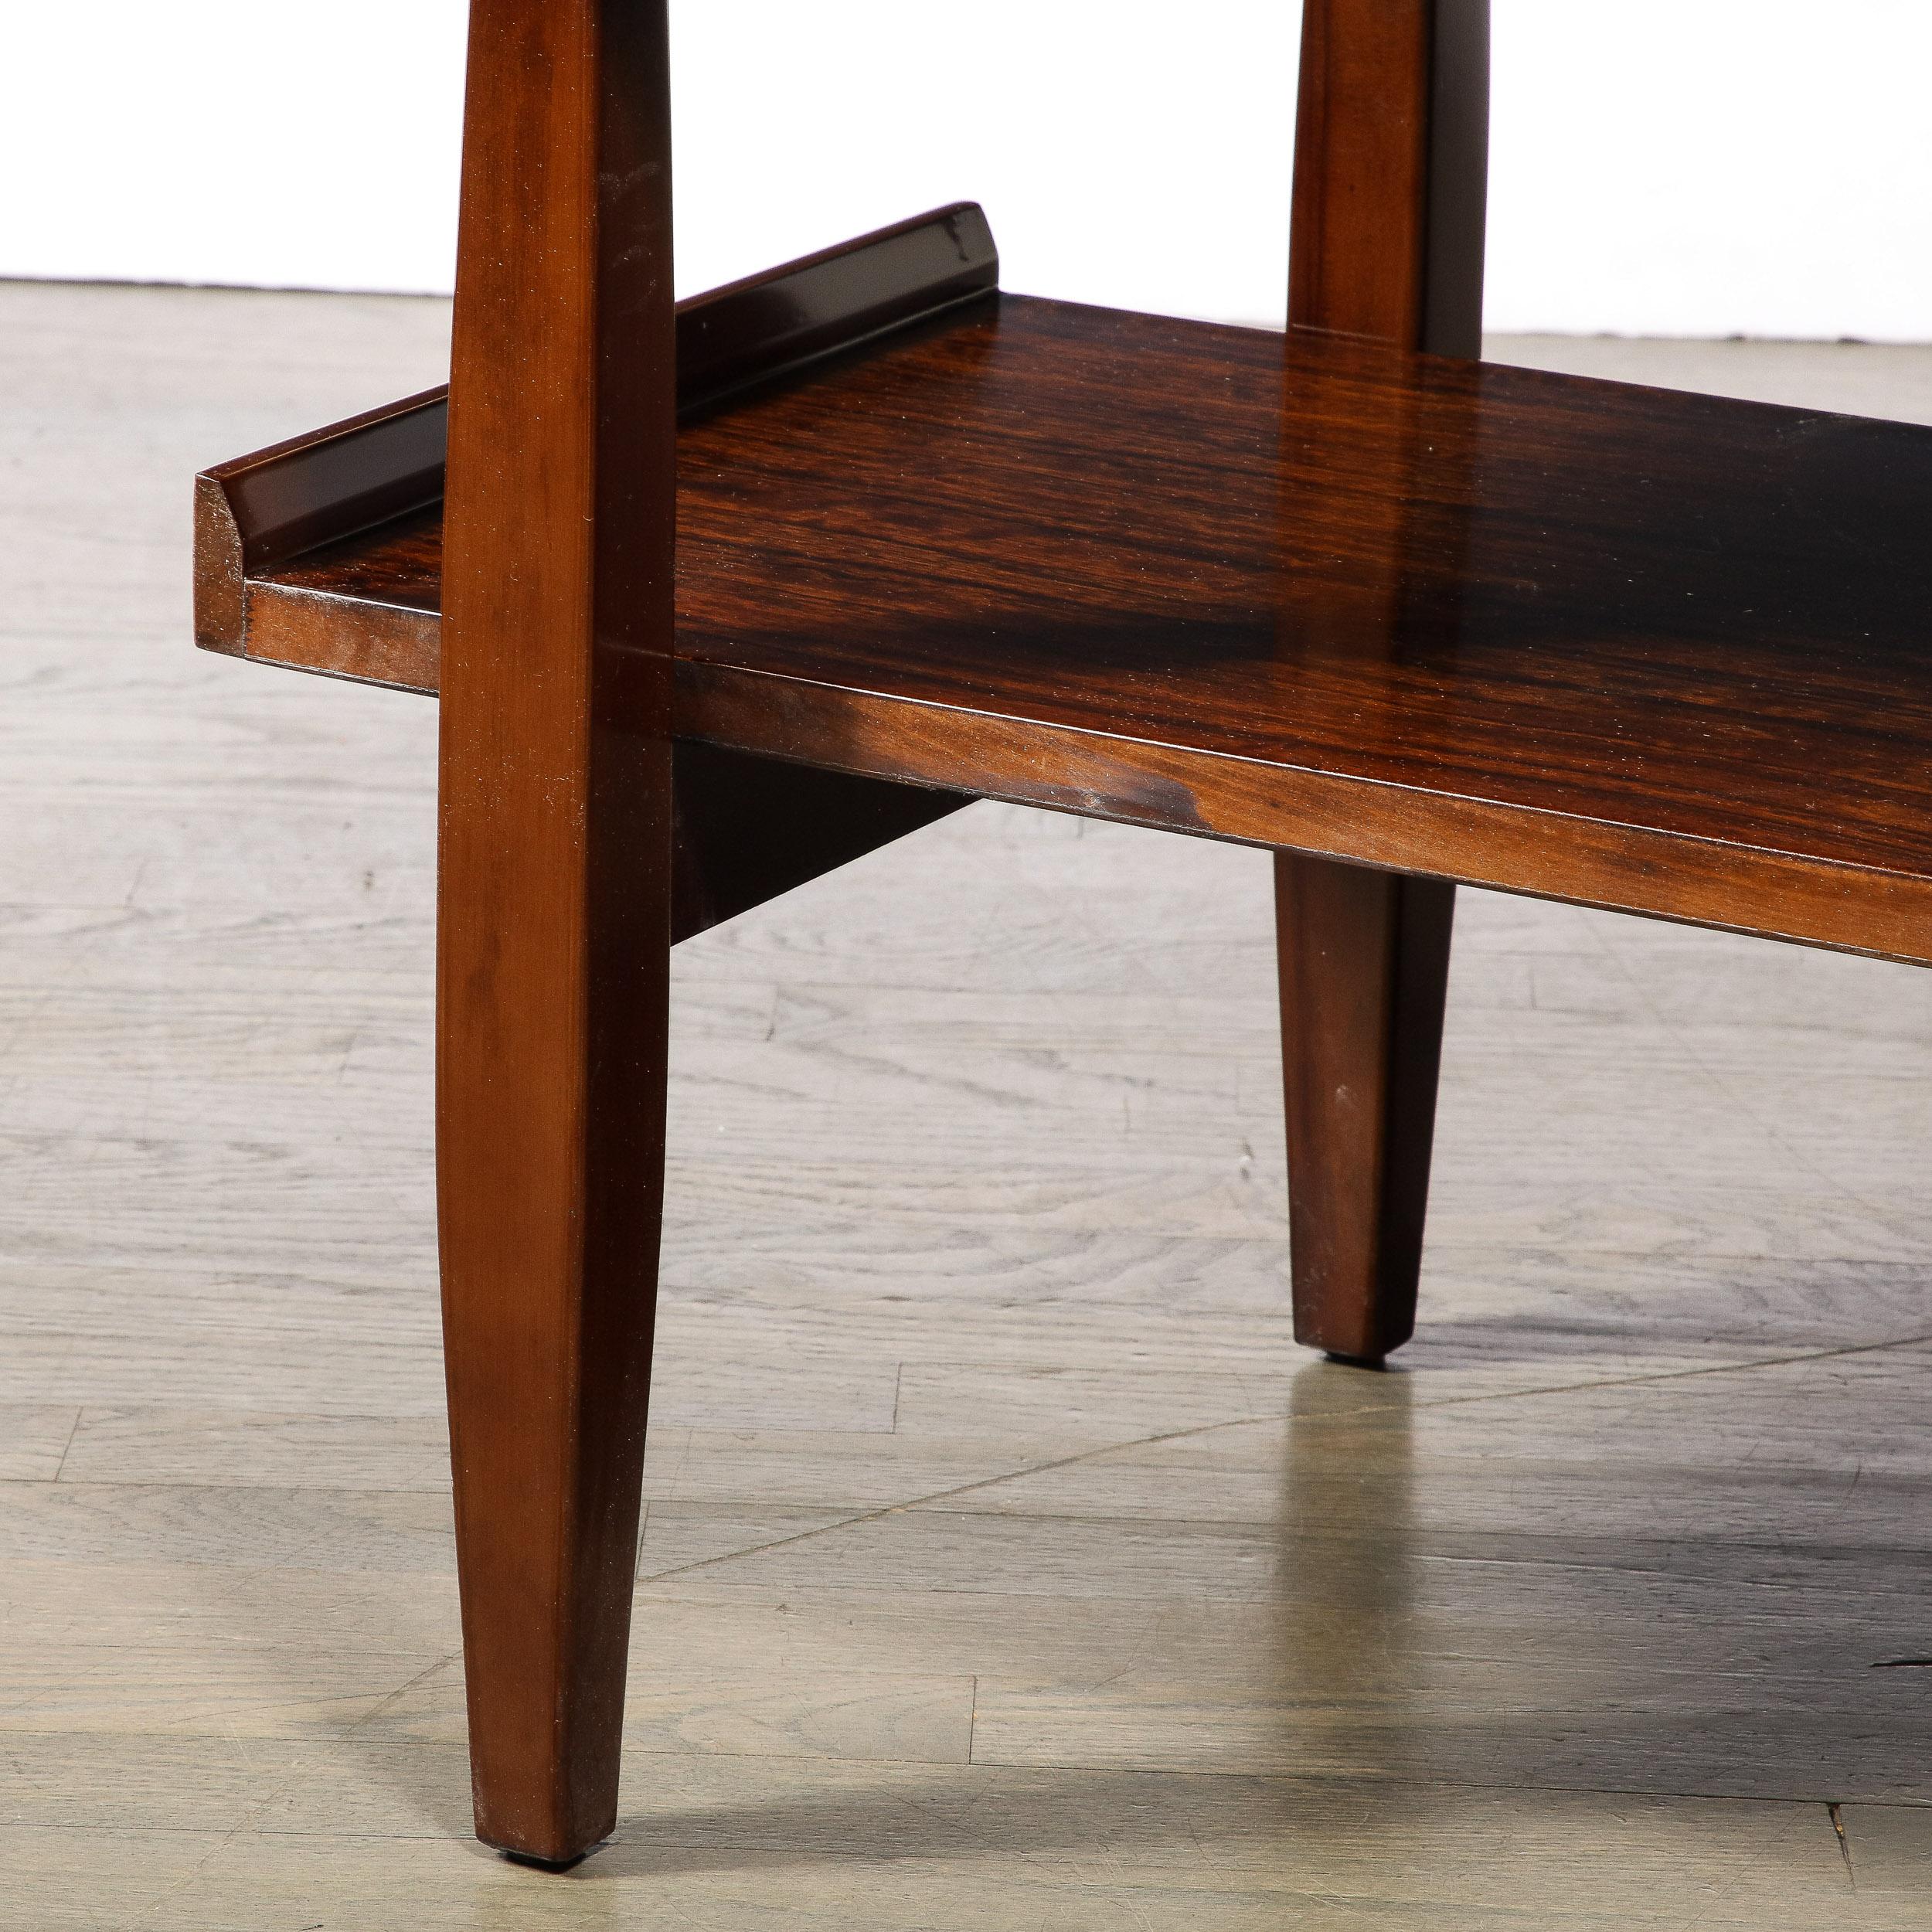 Mid-20th Century Pair of Mid-Century Modernist Two Tier Side Tables in Walnut with Tapered Legs